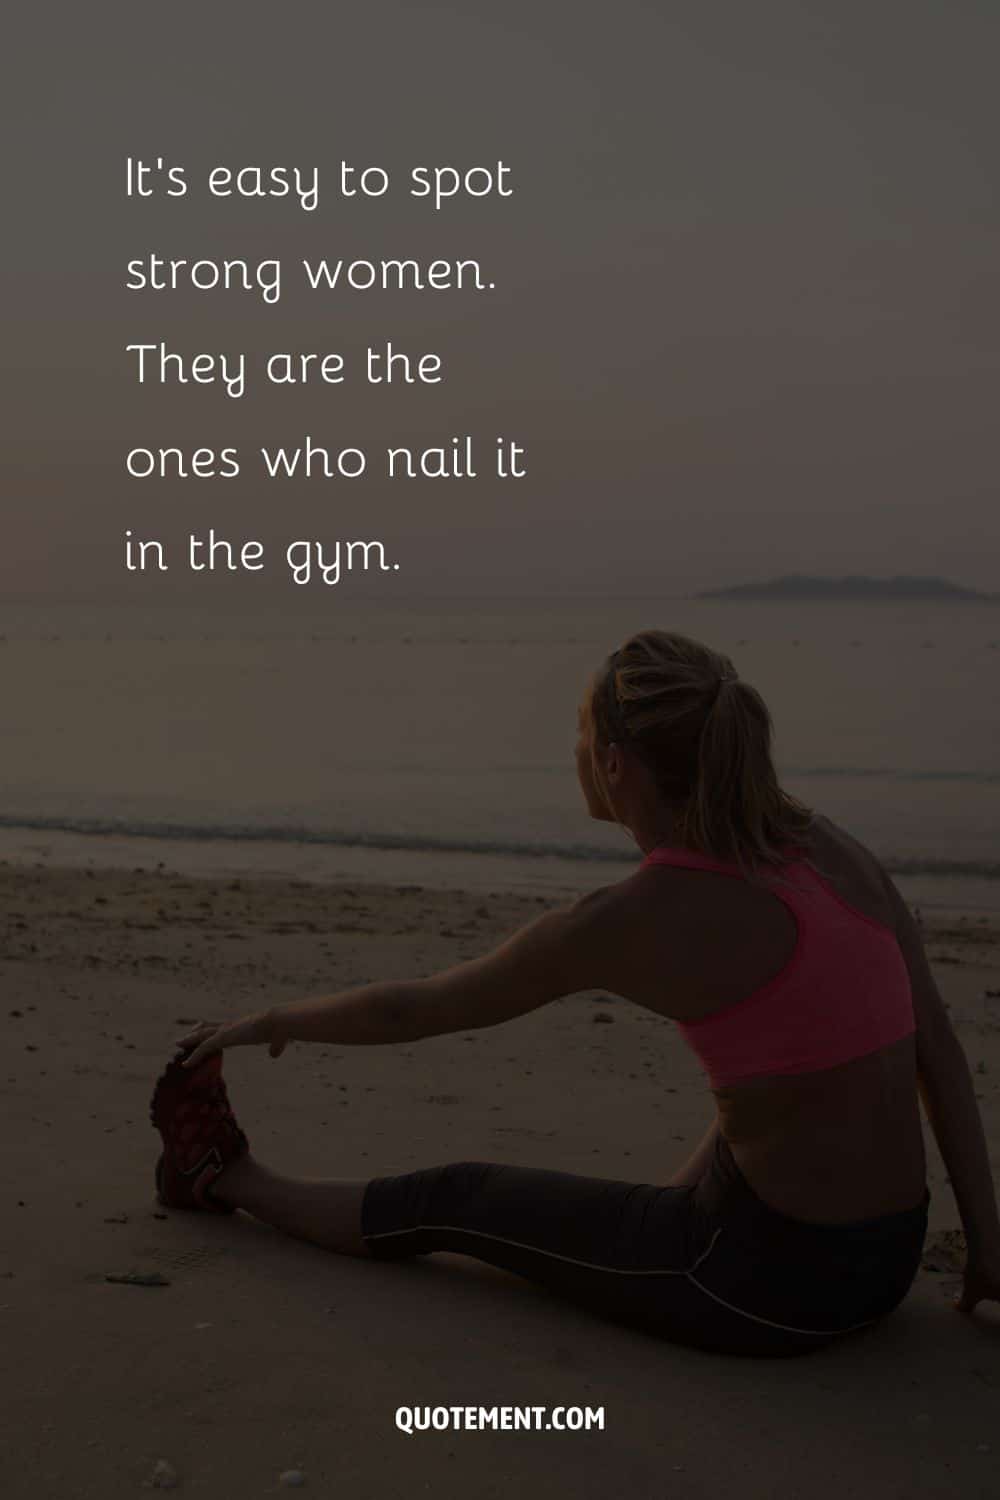 a girl exercising at the beach image representing exercise motivation quote for strength